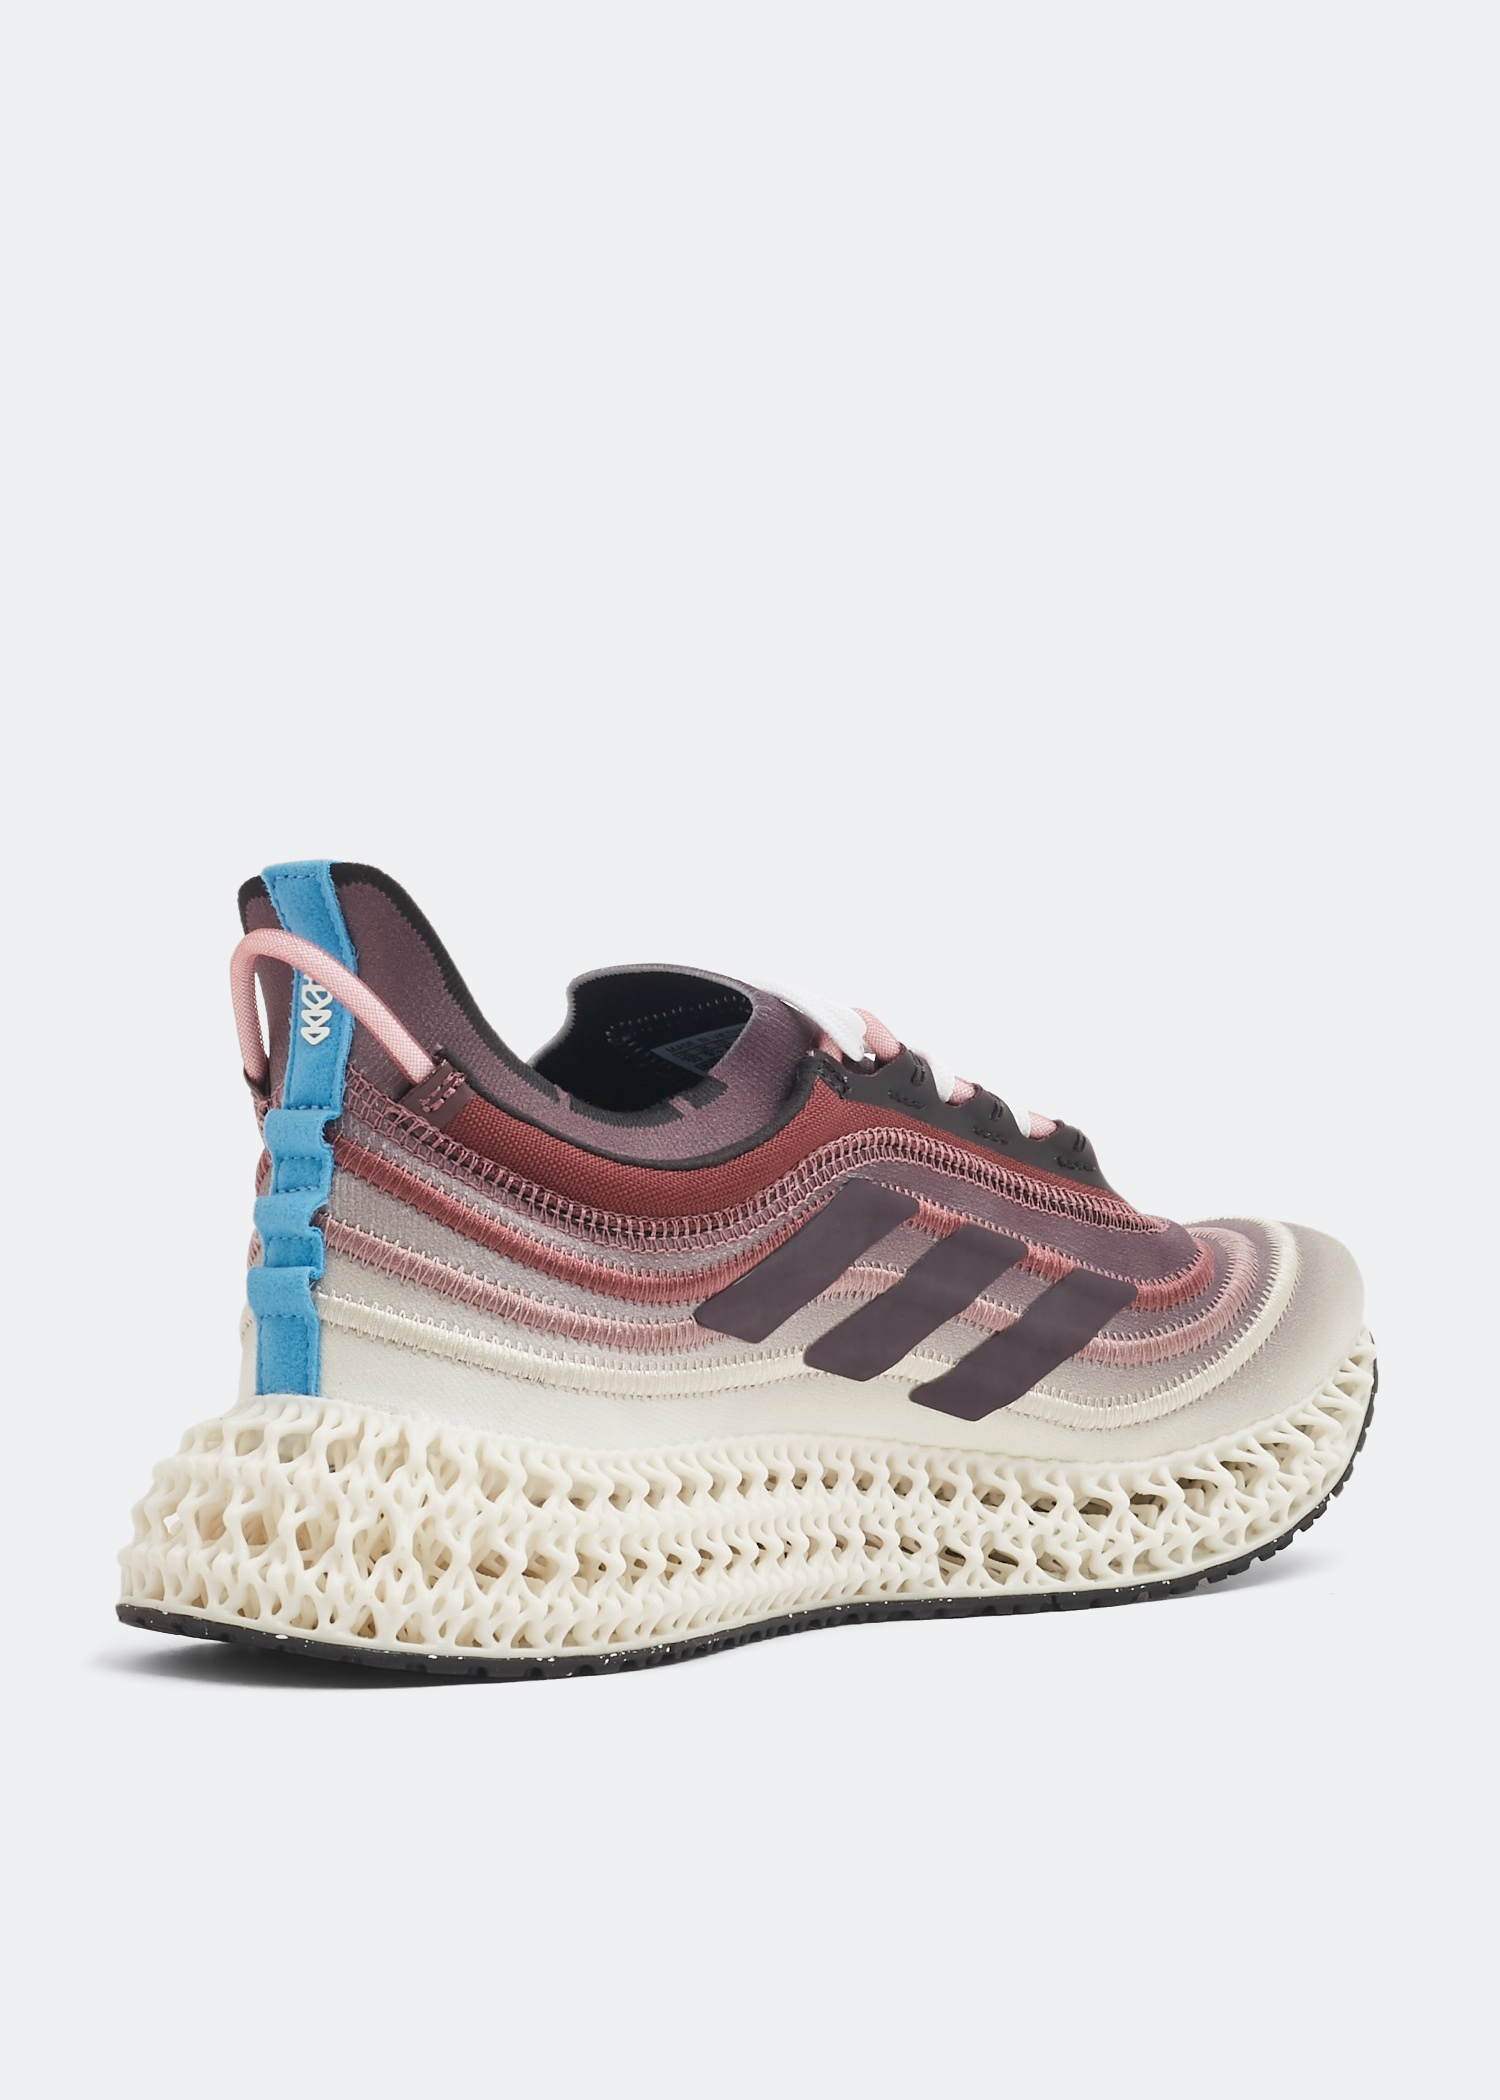 Adidas x Parley 4DFWD sneakers for Men - Multicolored in KSA 